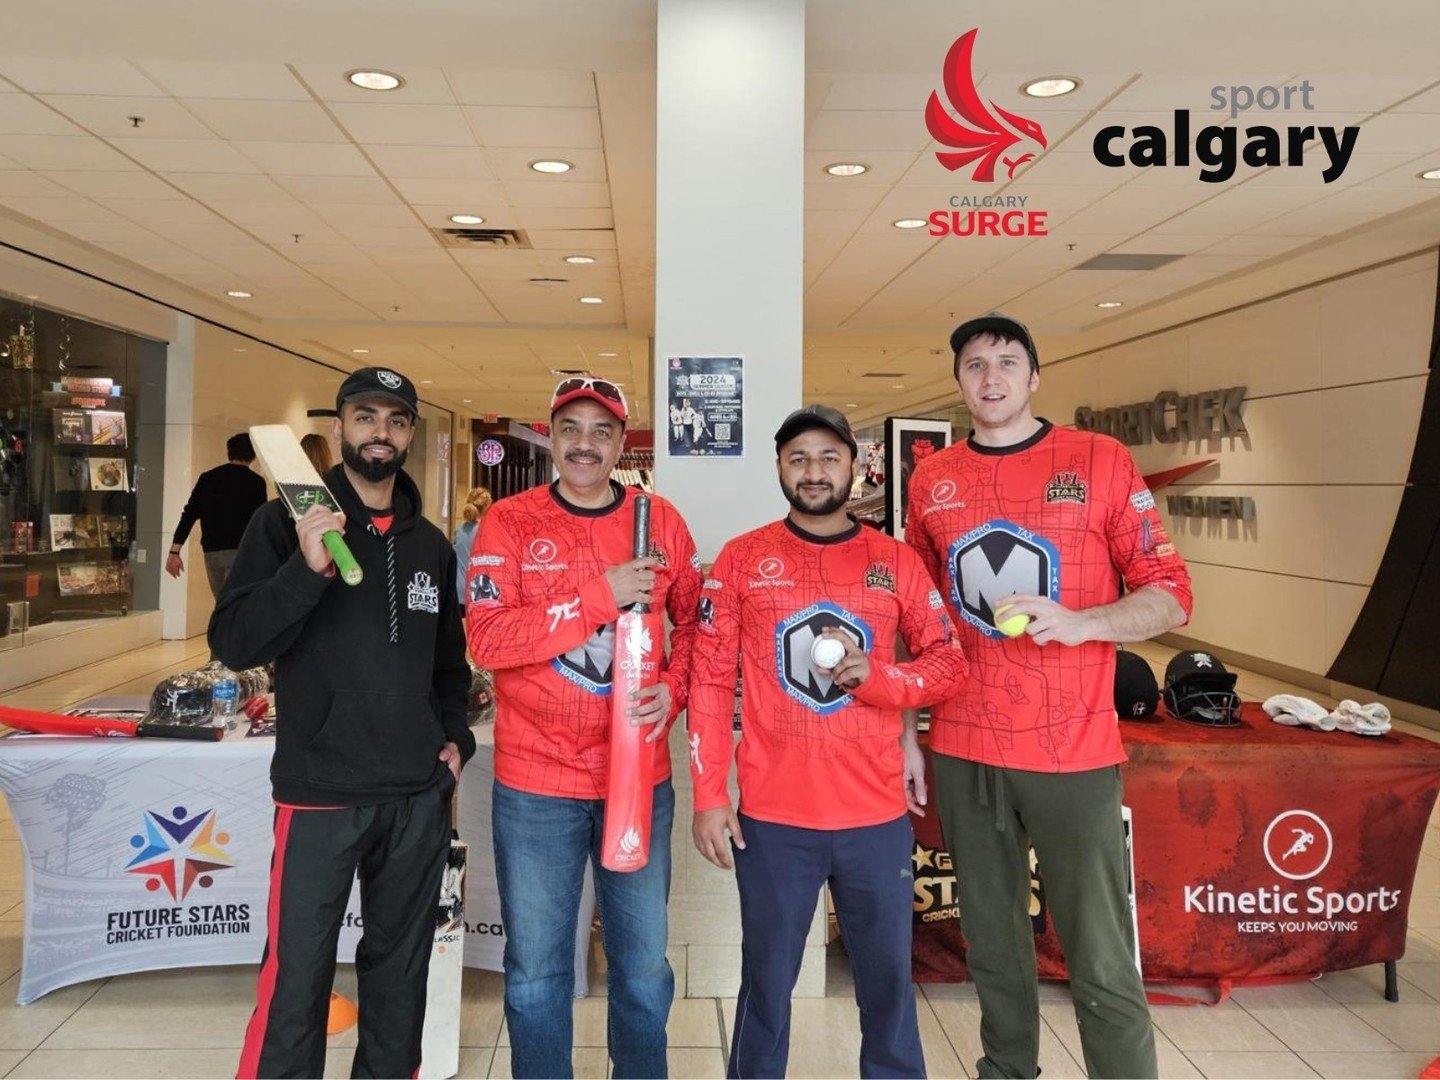 Join us at Chinook Mall this weekend alongside the @CalgarySurge, where several of our Sport Calgary Members will be showcasing their programs and offerings in the city! Don't miss the chance to drop by and say hello!